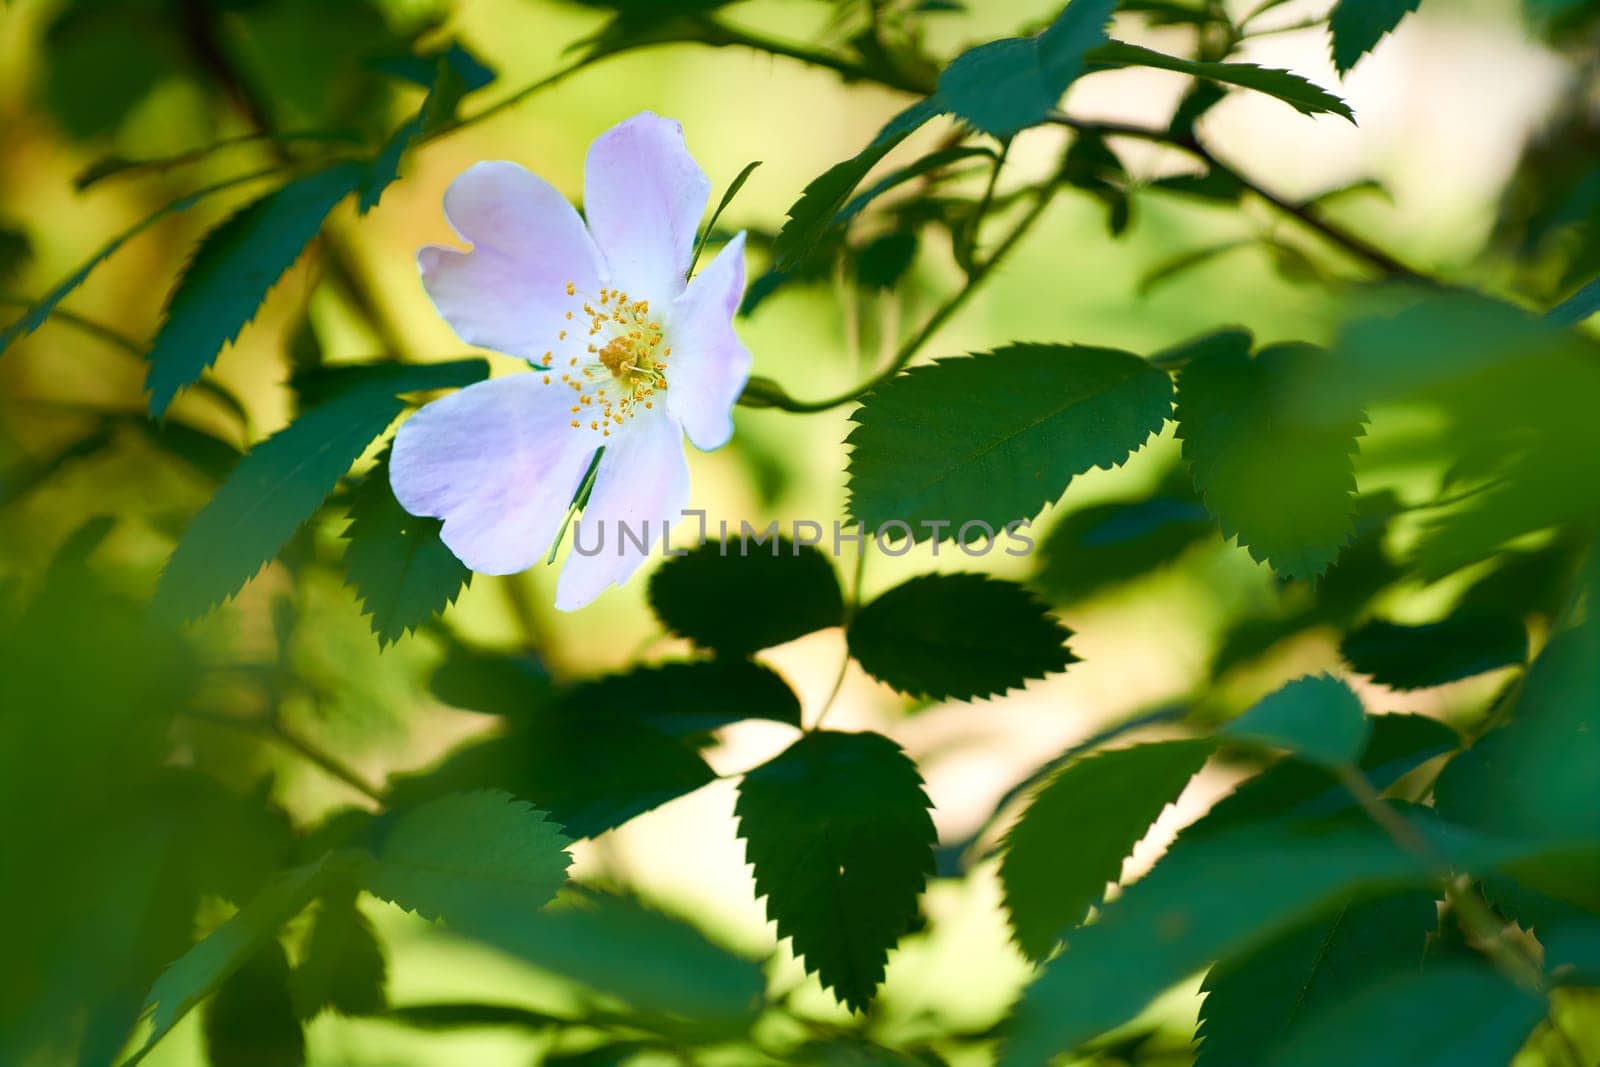 Wild rose with single, non double flowers, plant with useful berries